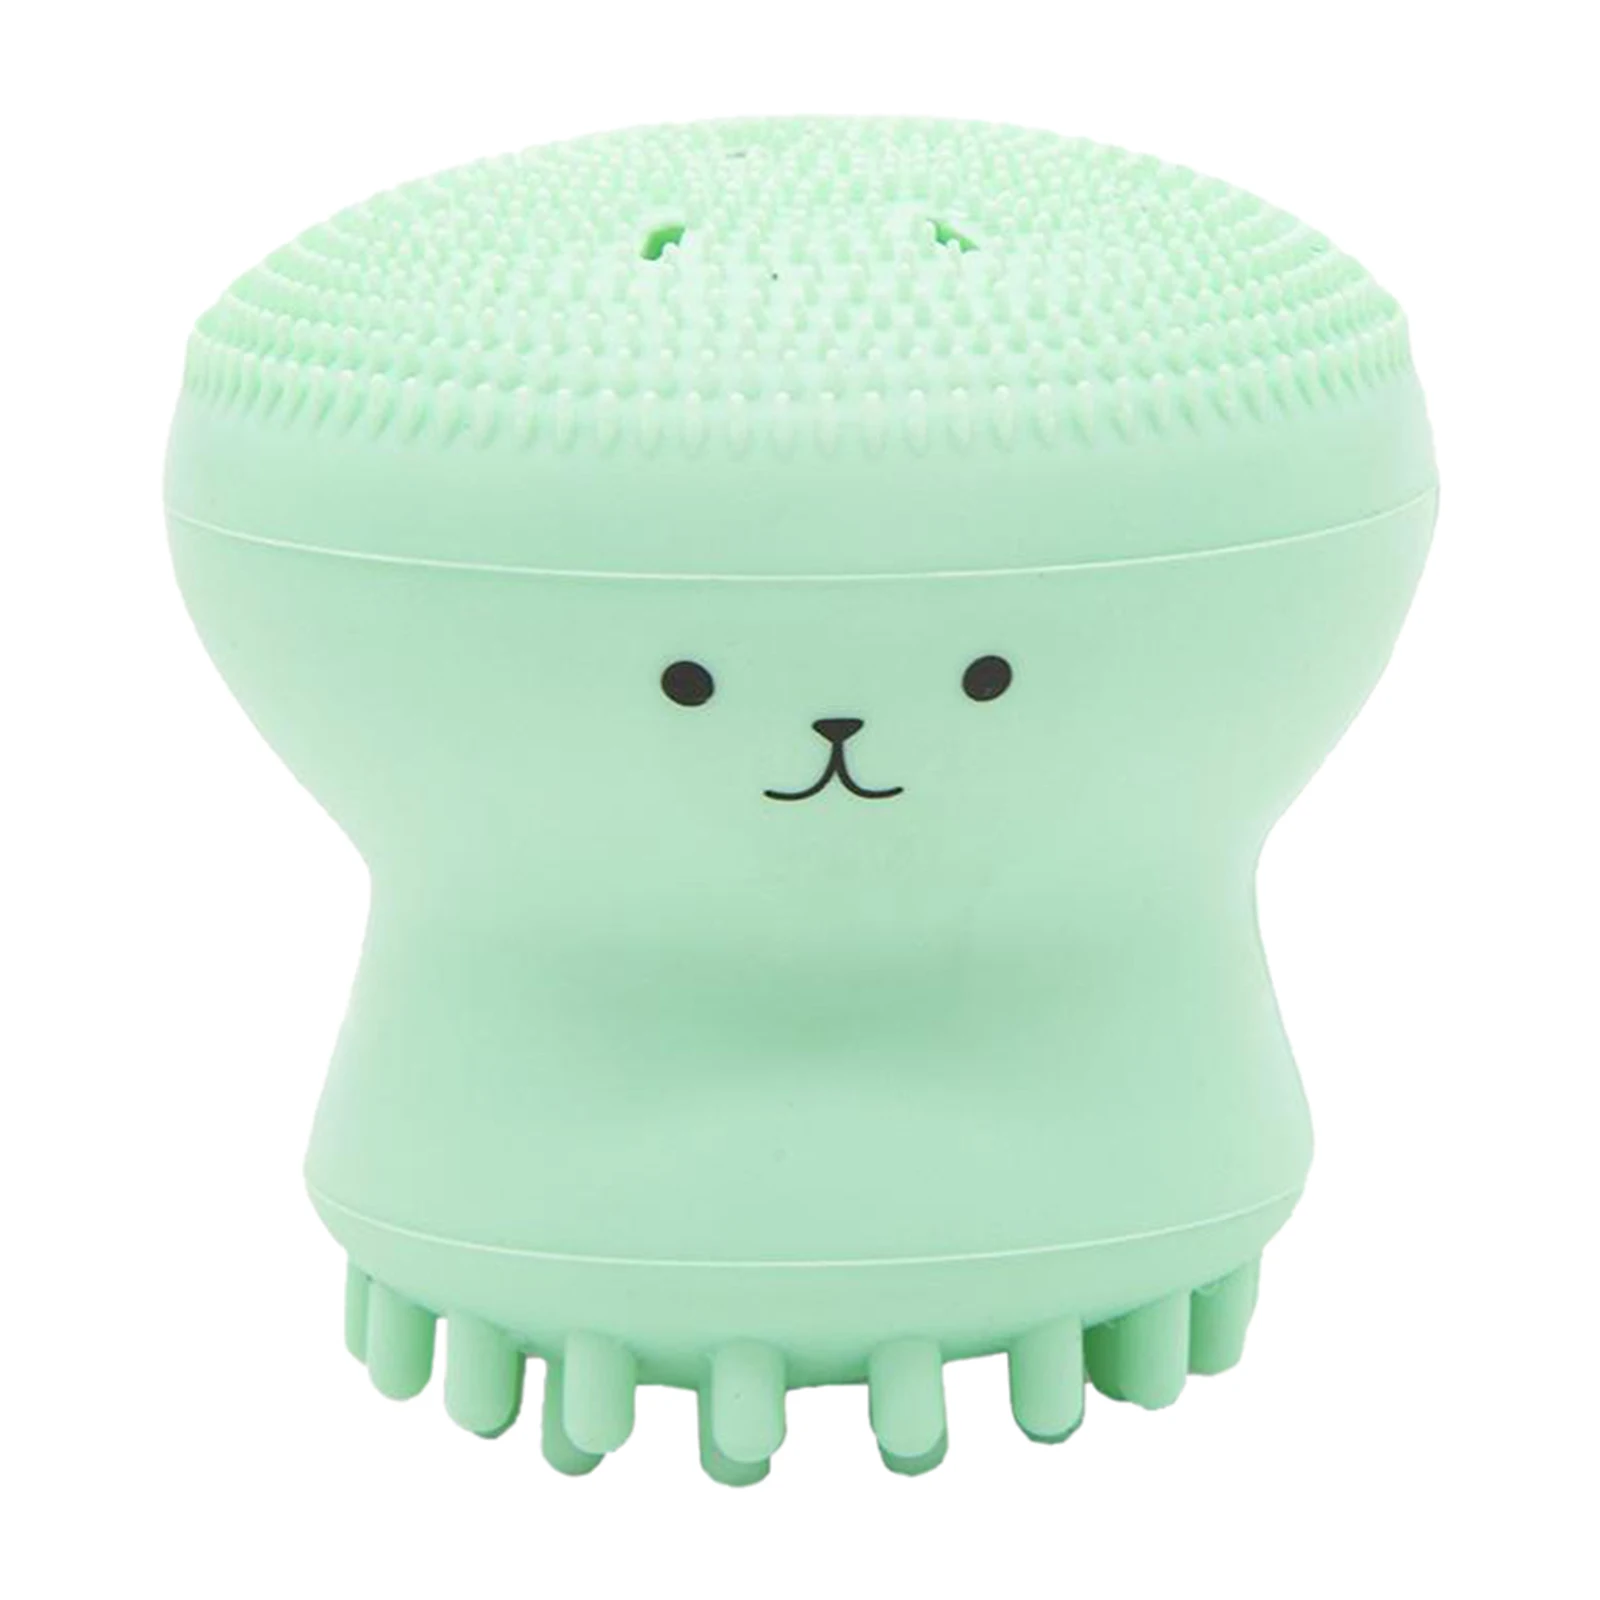 Octopus Cute Silicone Face Brush for Massage Makeup Tool Deep Cleansing